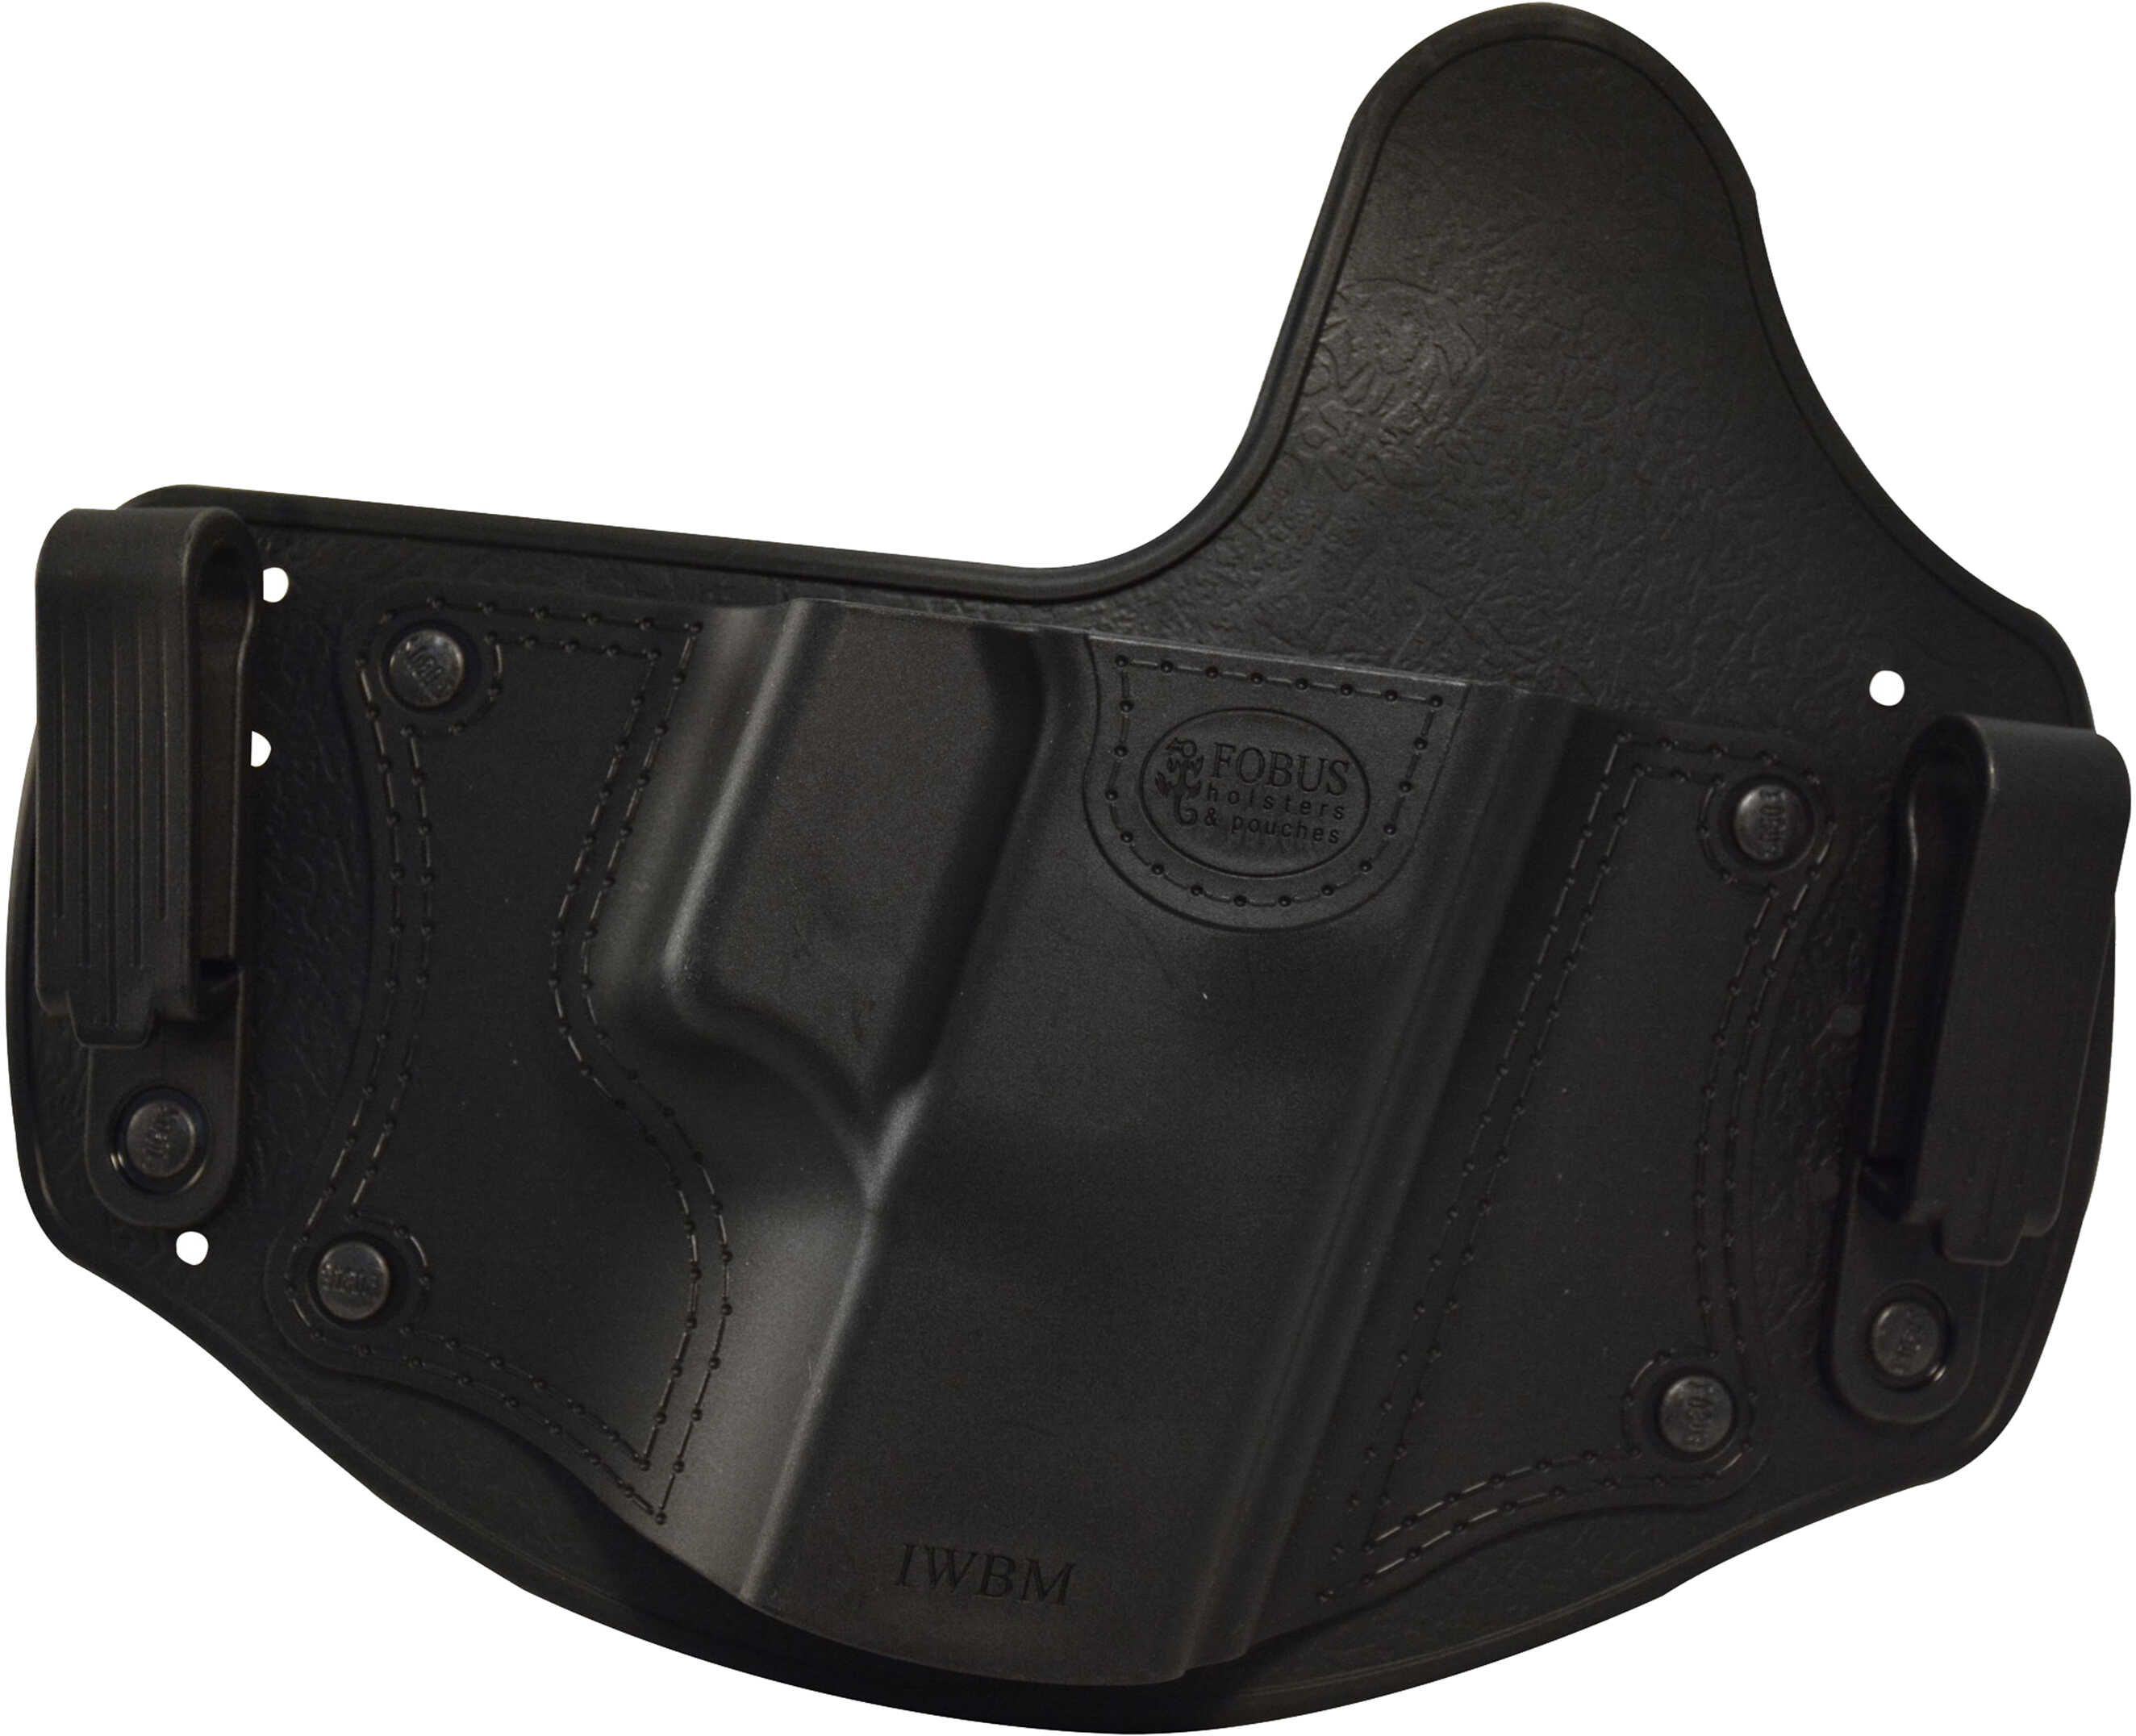 Fobus Universal Inside the Waistband Holster, Right Hand, Fit Up To 4-Inch Barrels, Black Md: IWBMCC